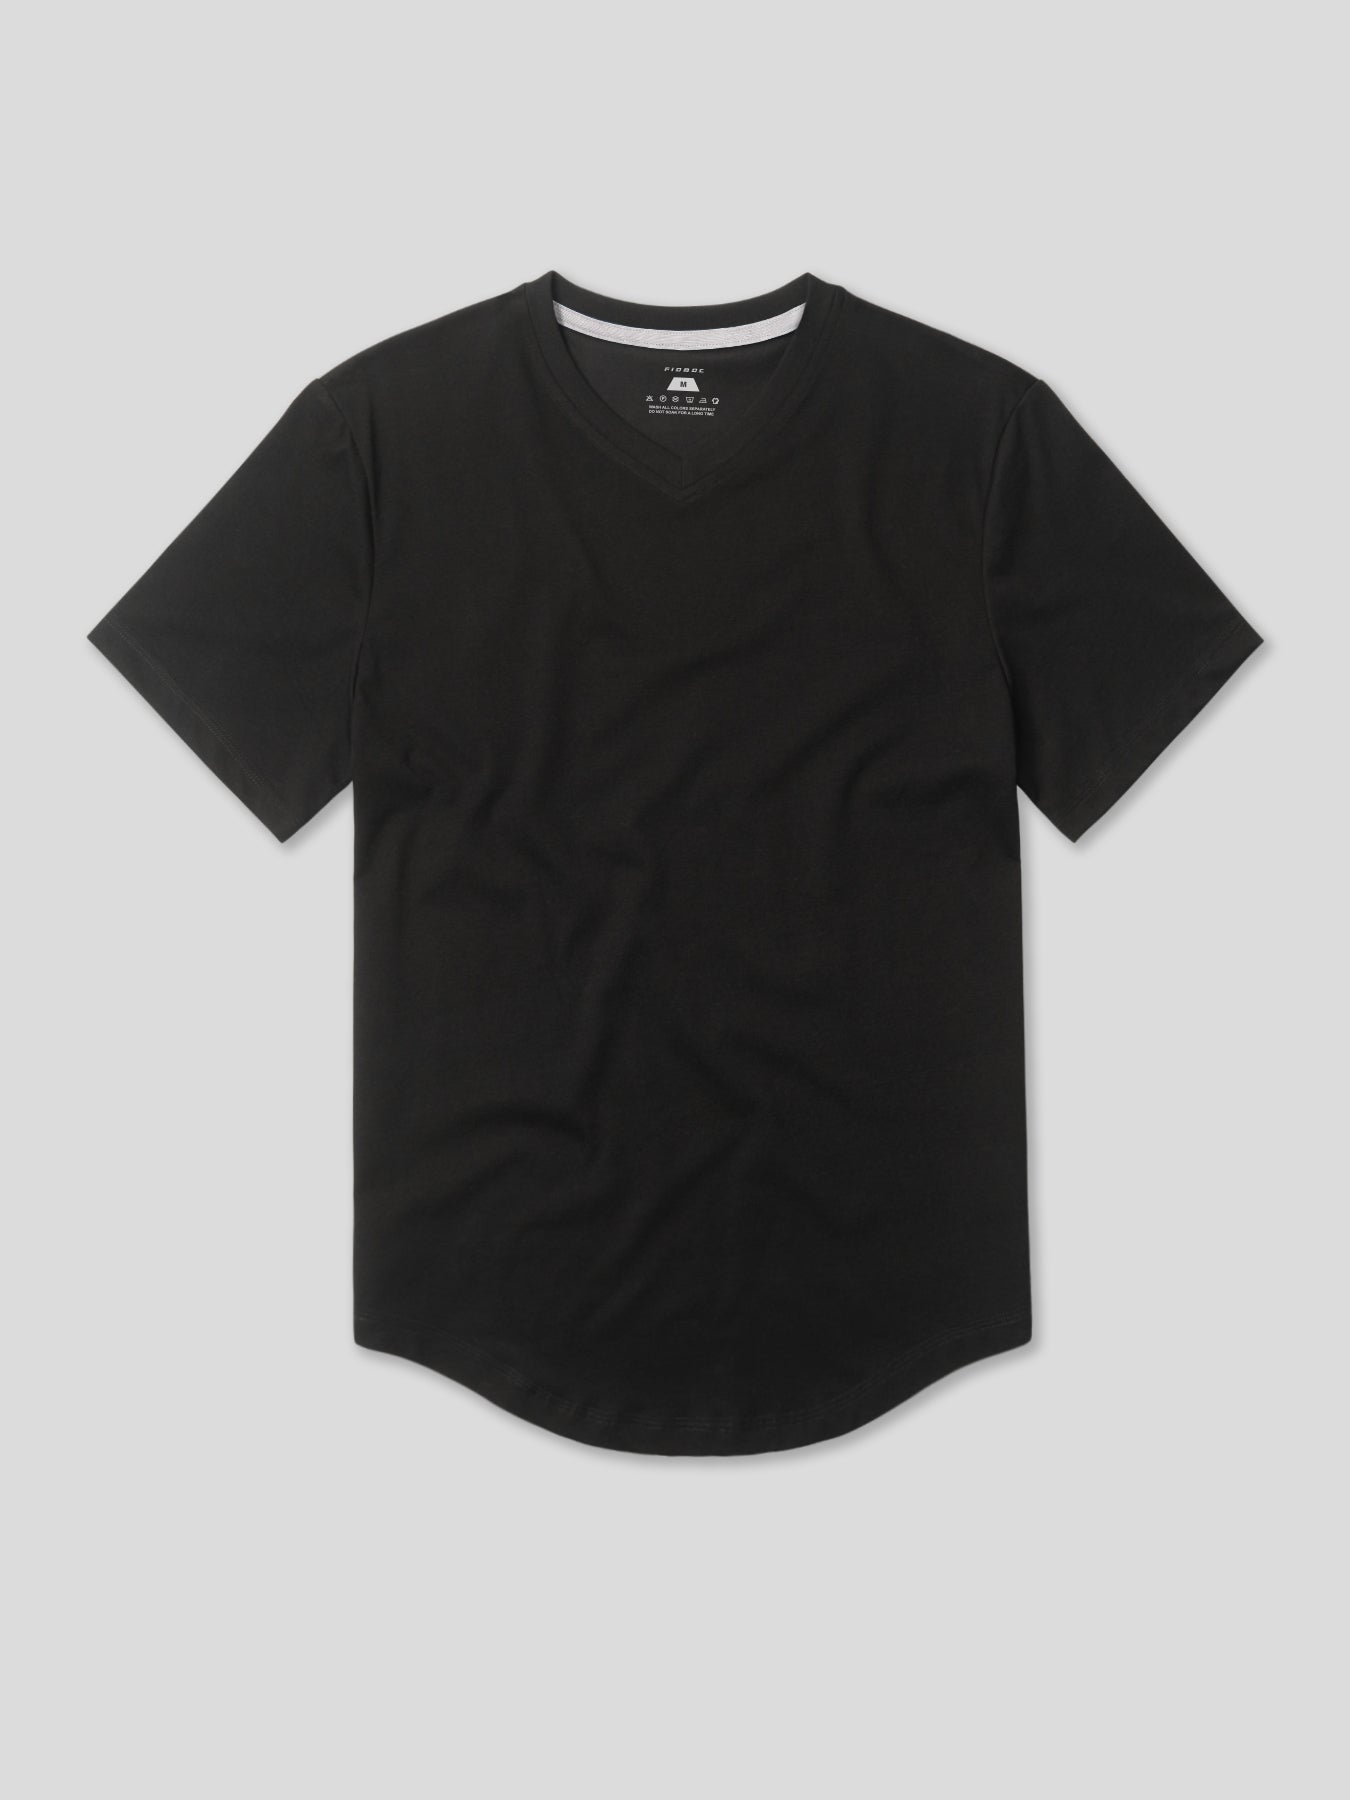 StayCool 2.0 V-neck Elongated Tee: Classic Fit